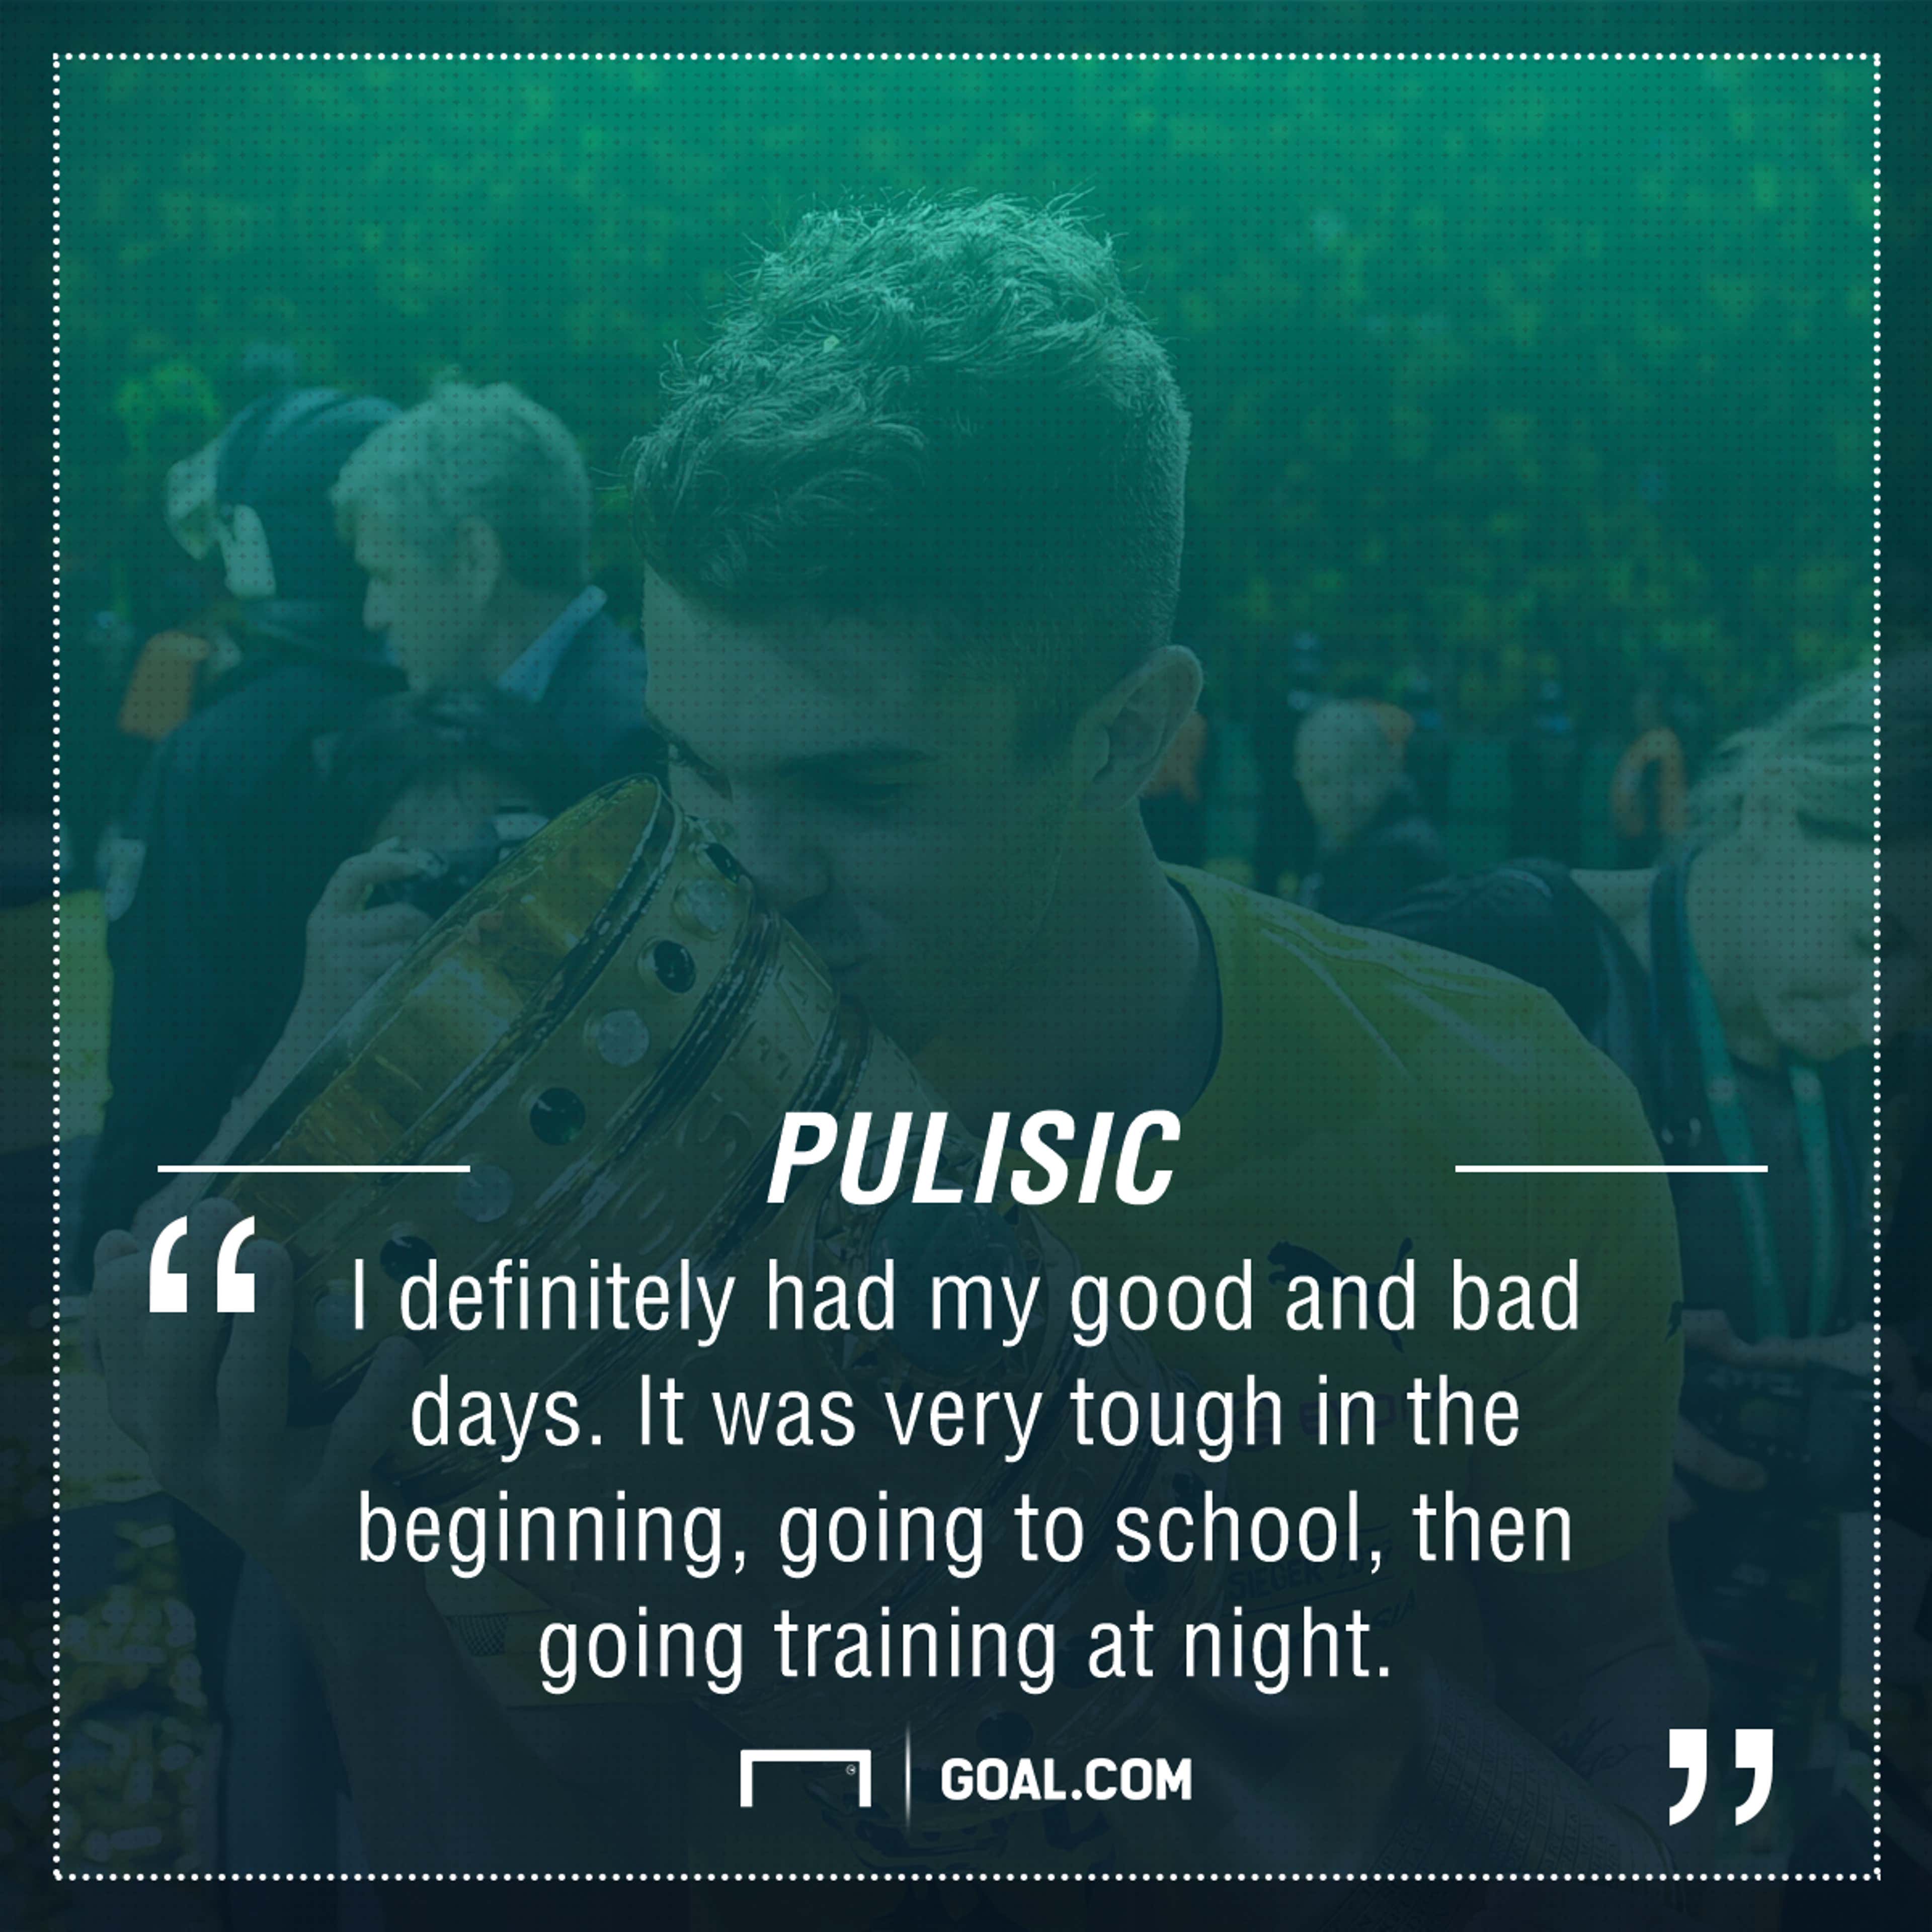 Christian Pulisic quote 06072017